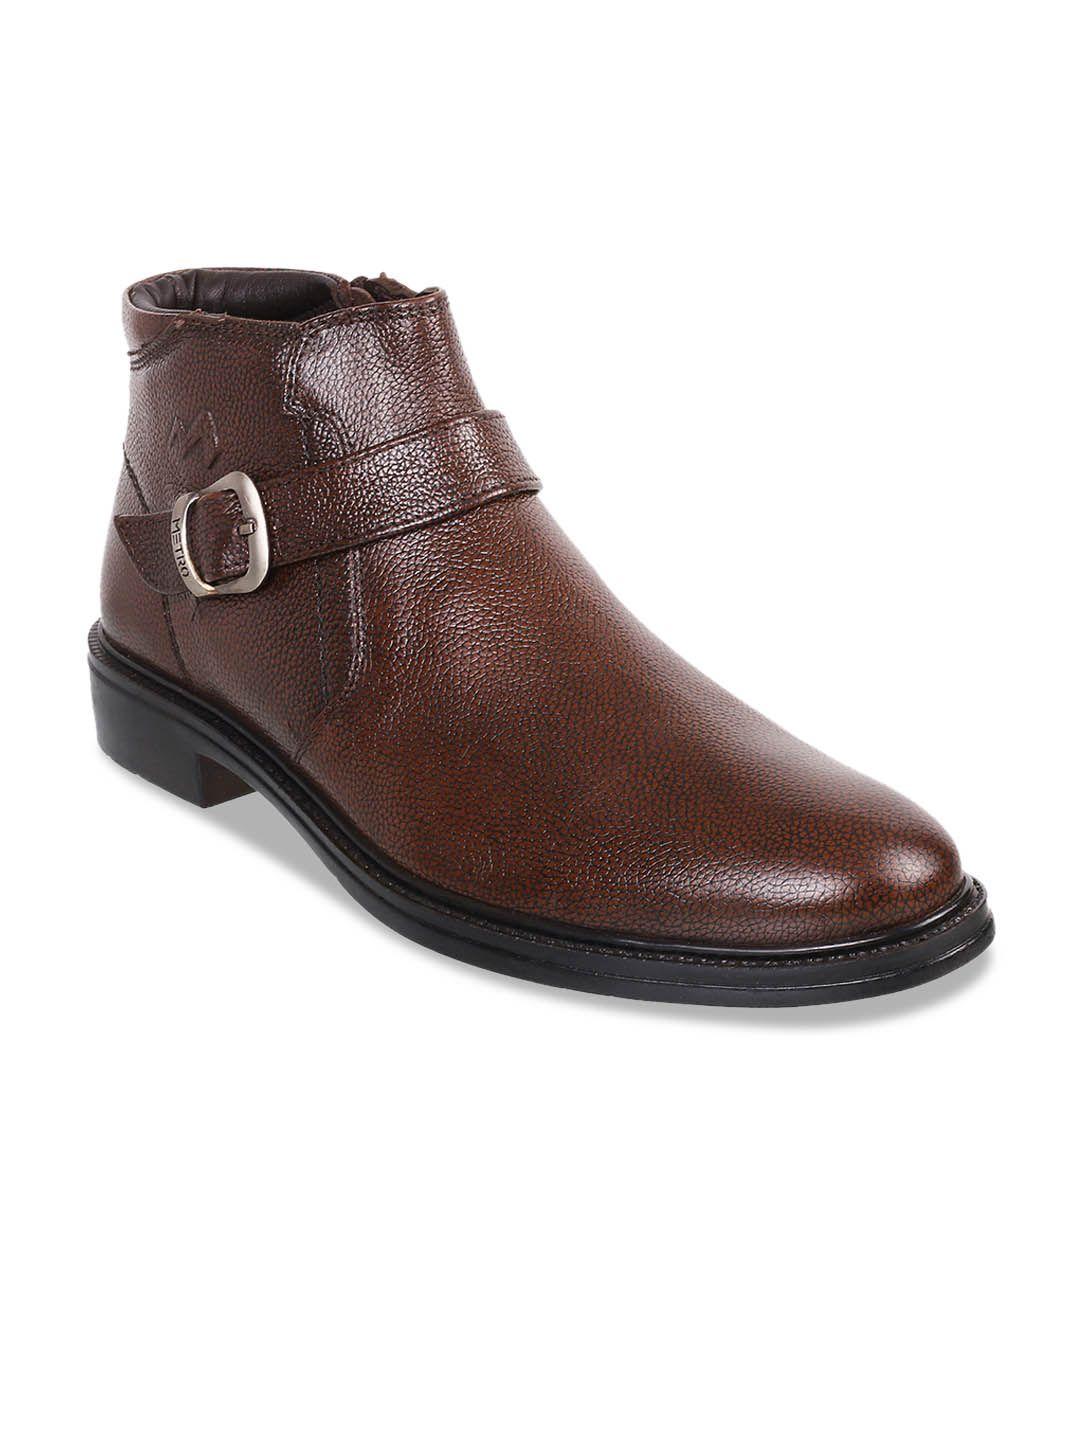 metro men brown textured leather high-top flat boots